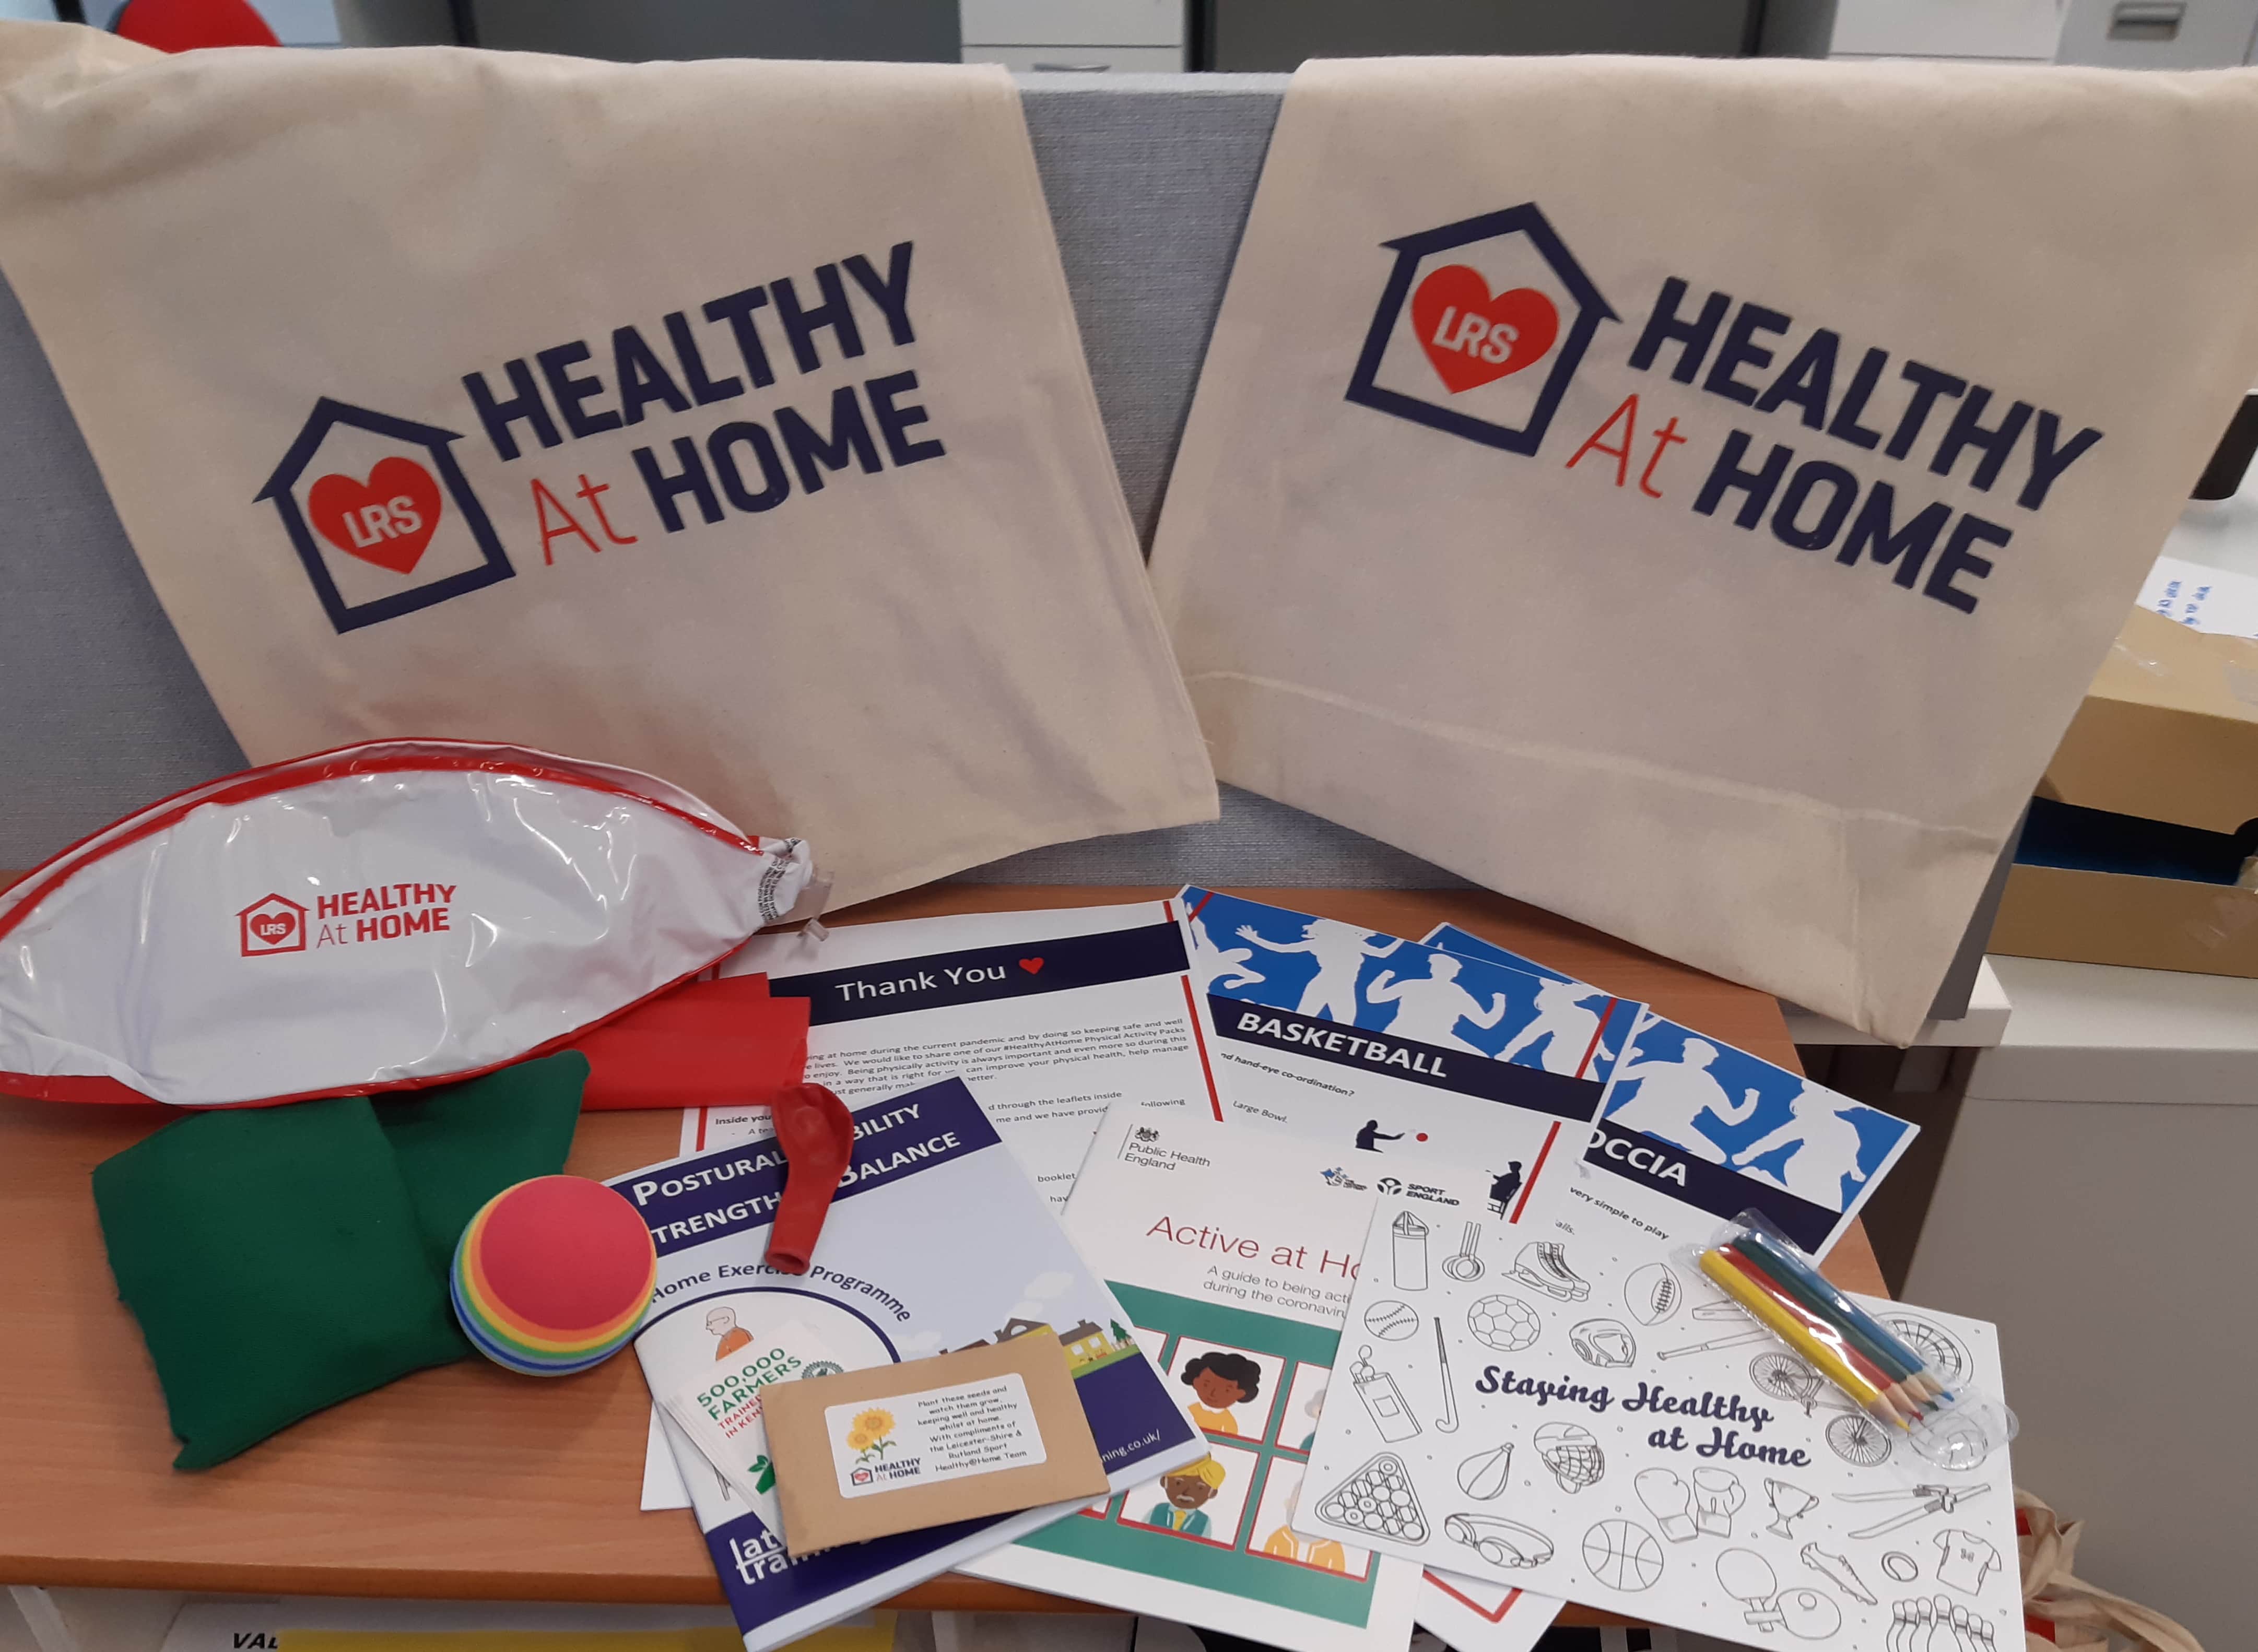 Contents of healthy at home packs including balls, bean bags, activity cards